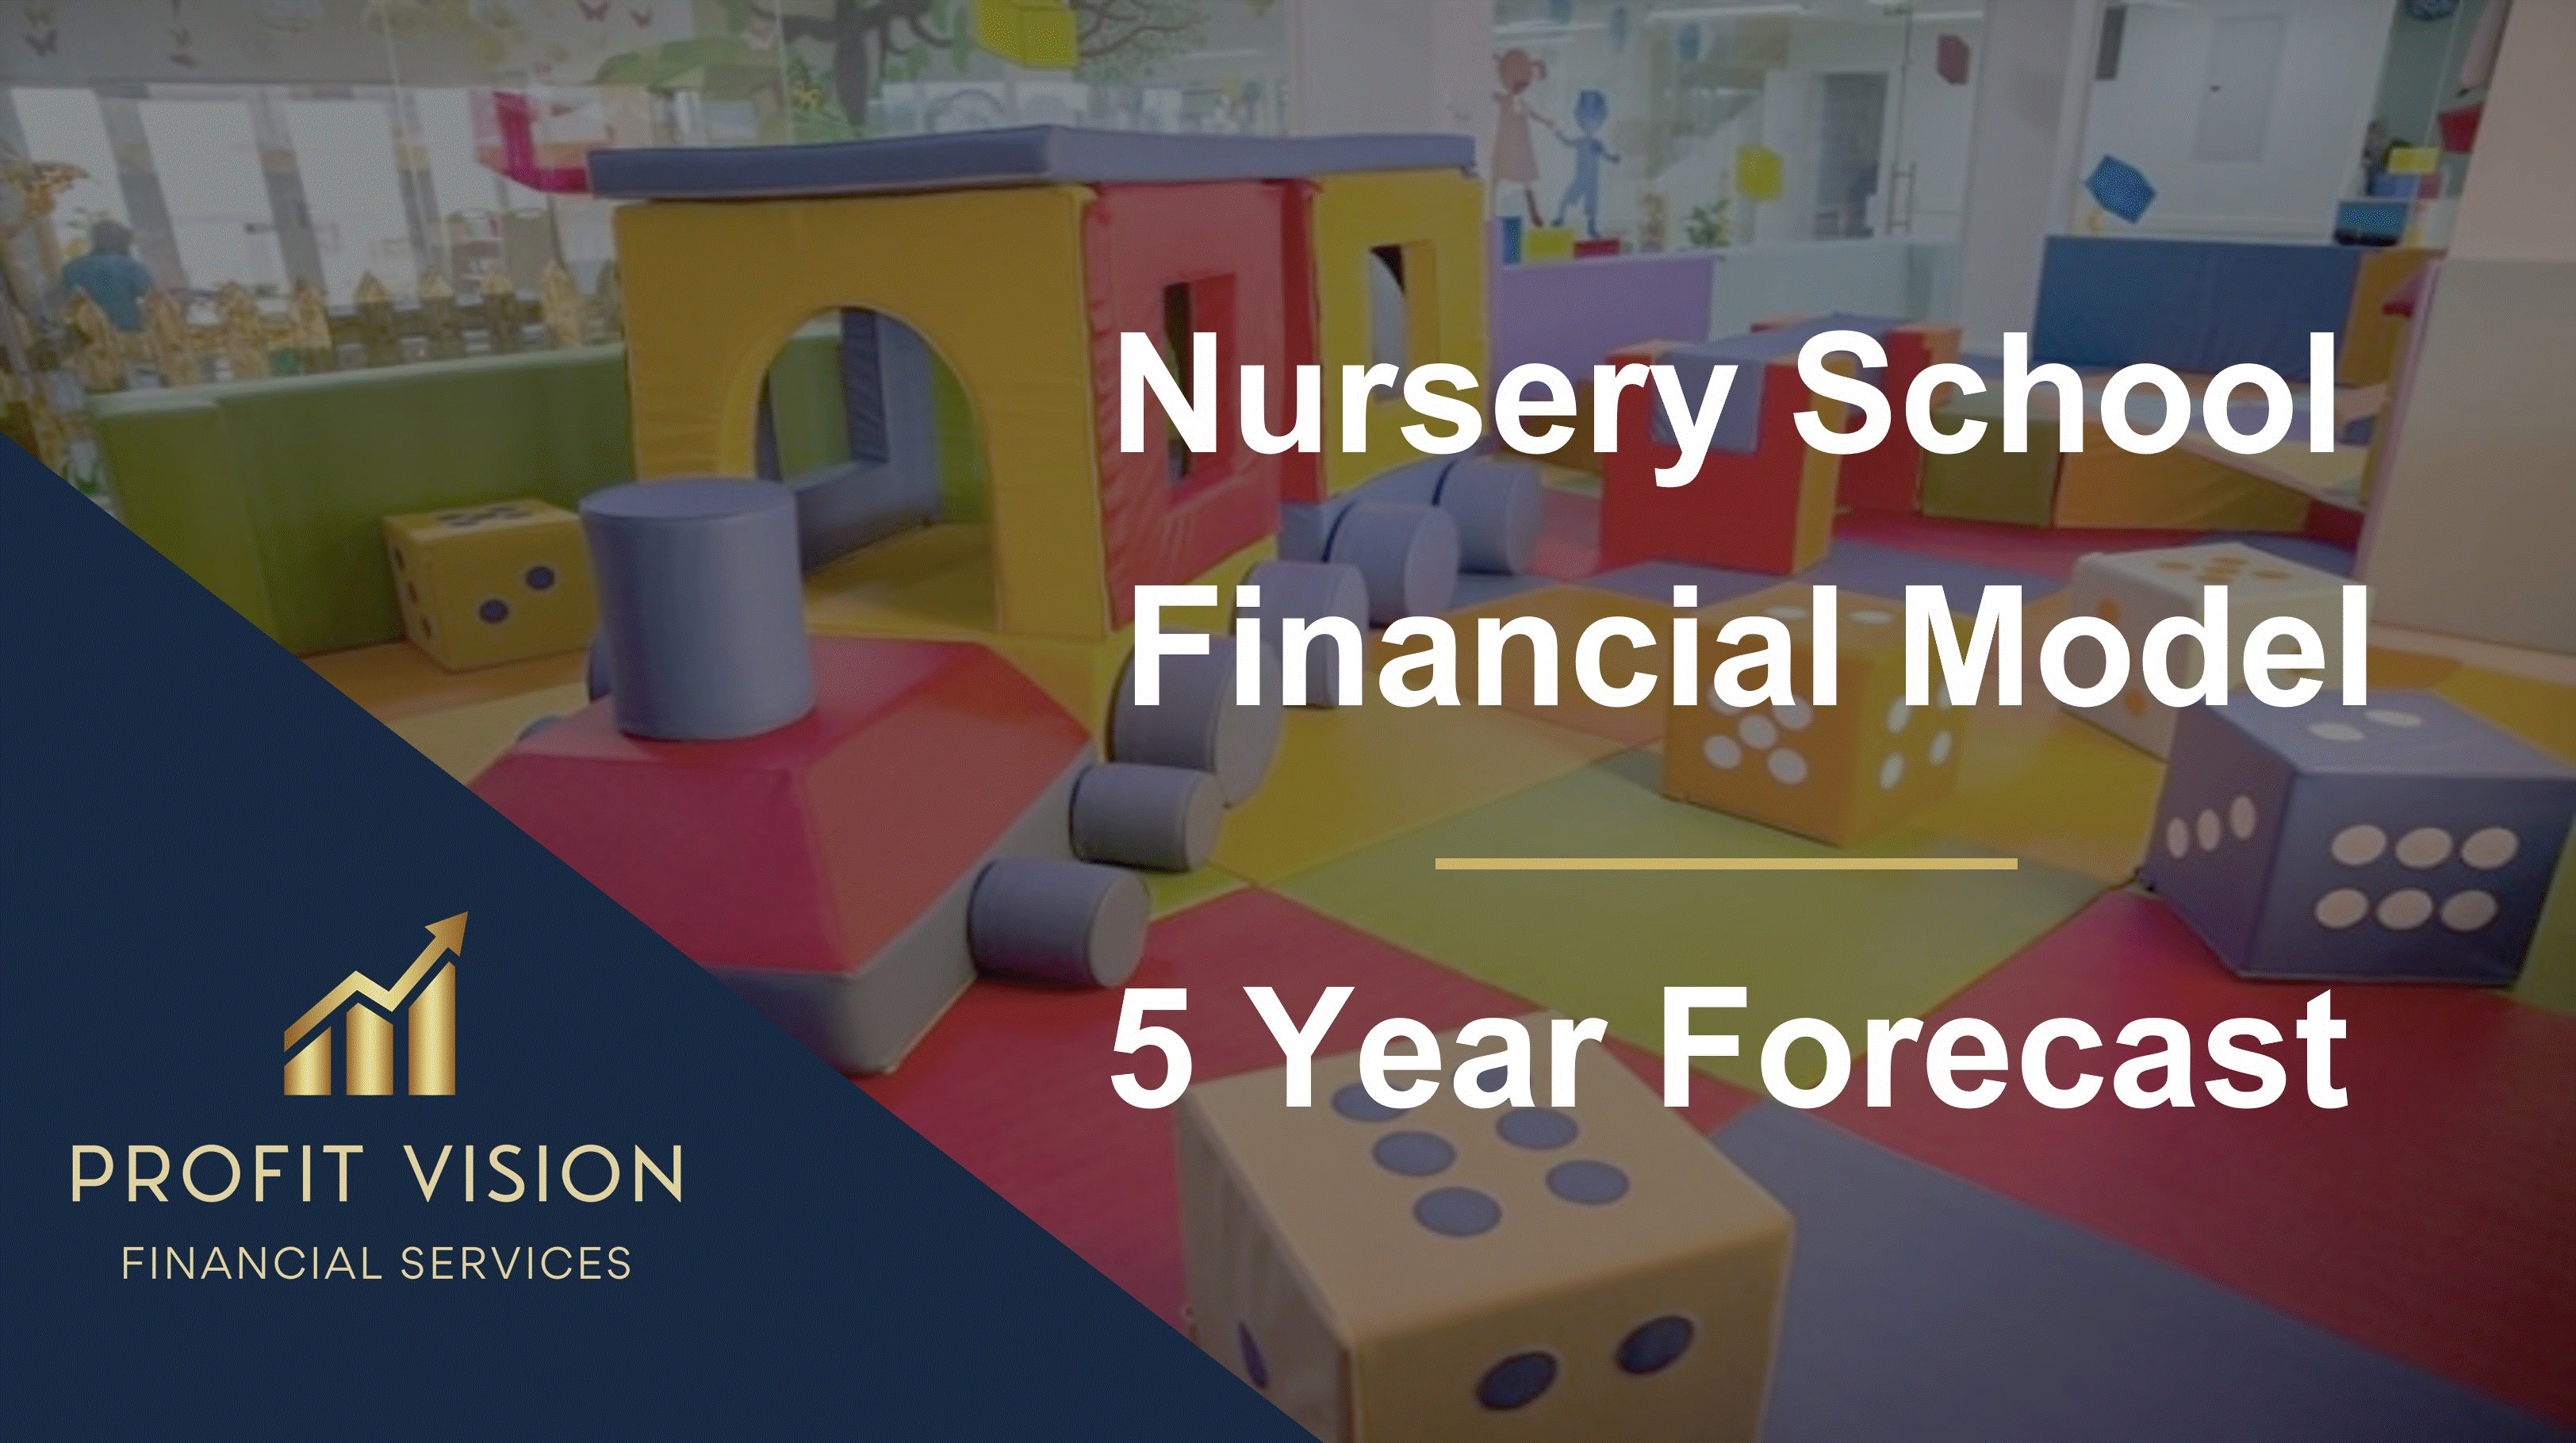 This is a partial preview of Nursery School Financial Model - 5 Year Business Plan (Excel workbook (XLSX)). 